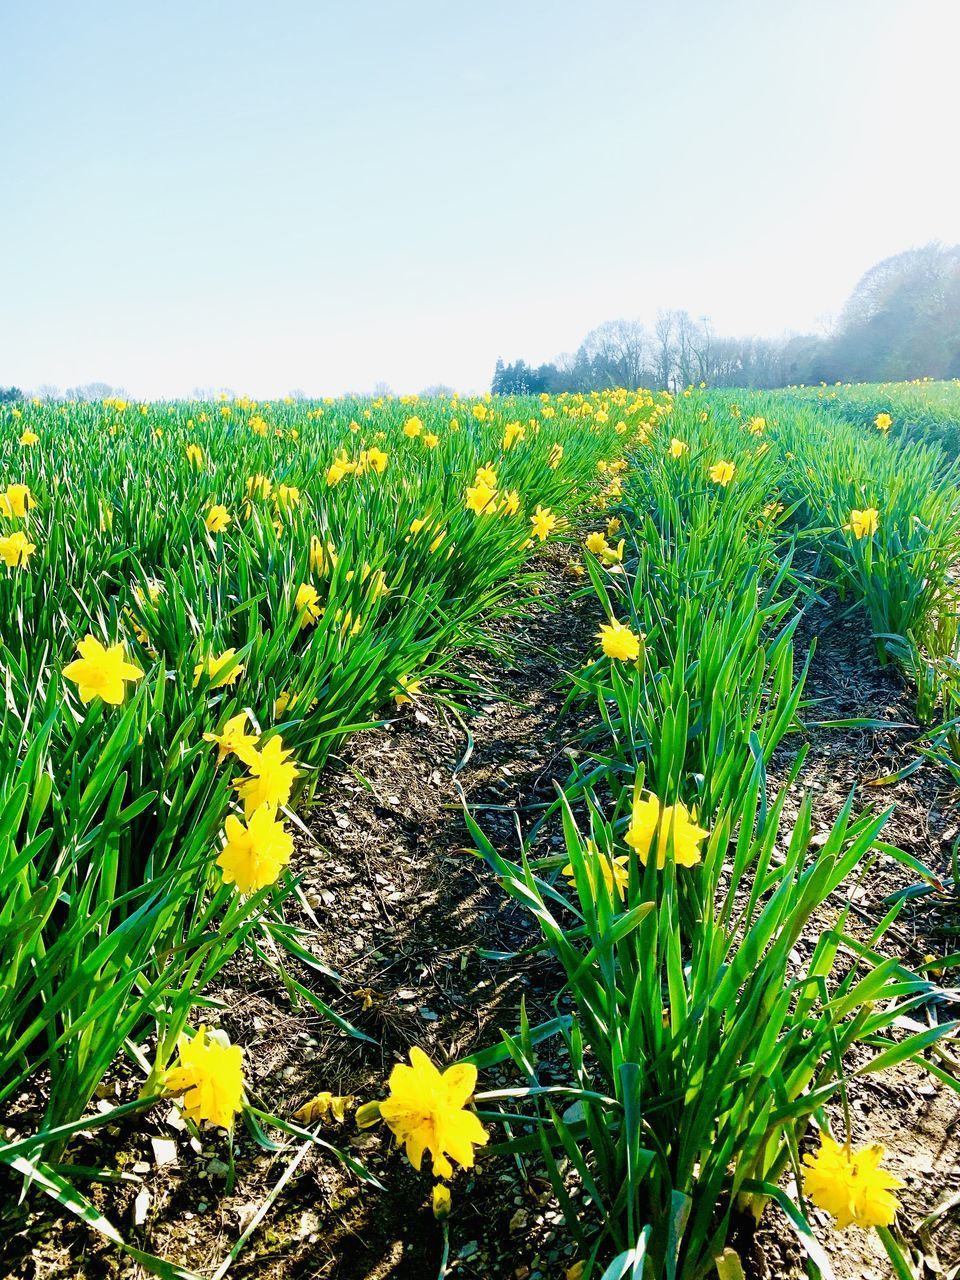 VIEW OF YELLOW FLOWERS GROWING ON FIELD